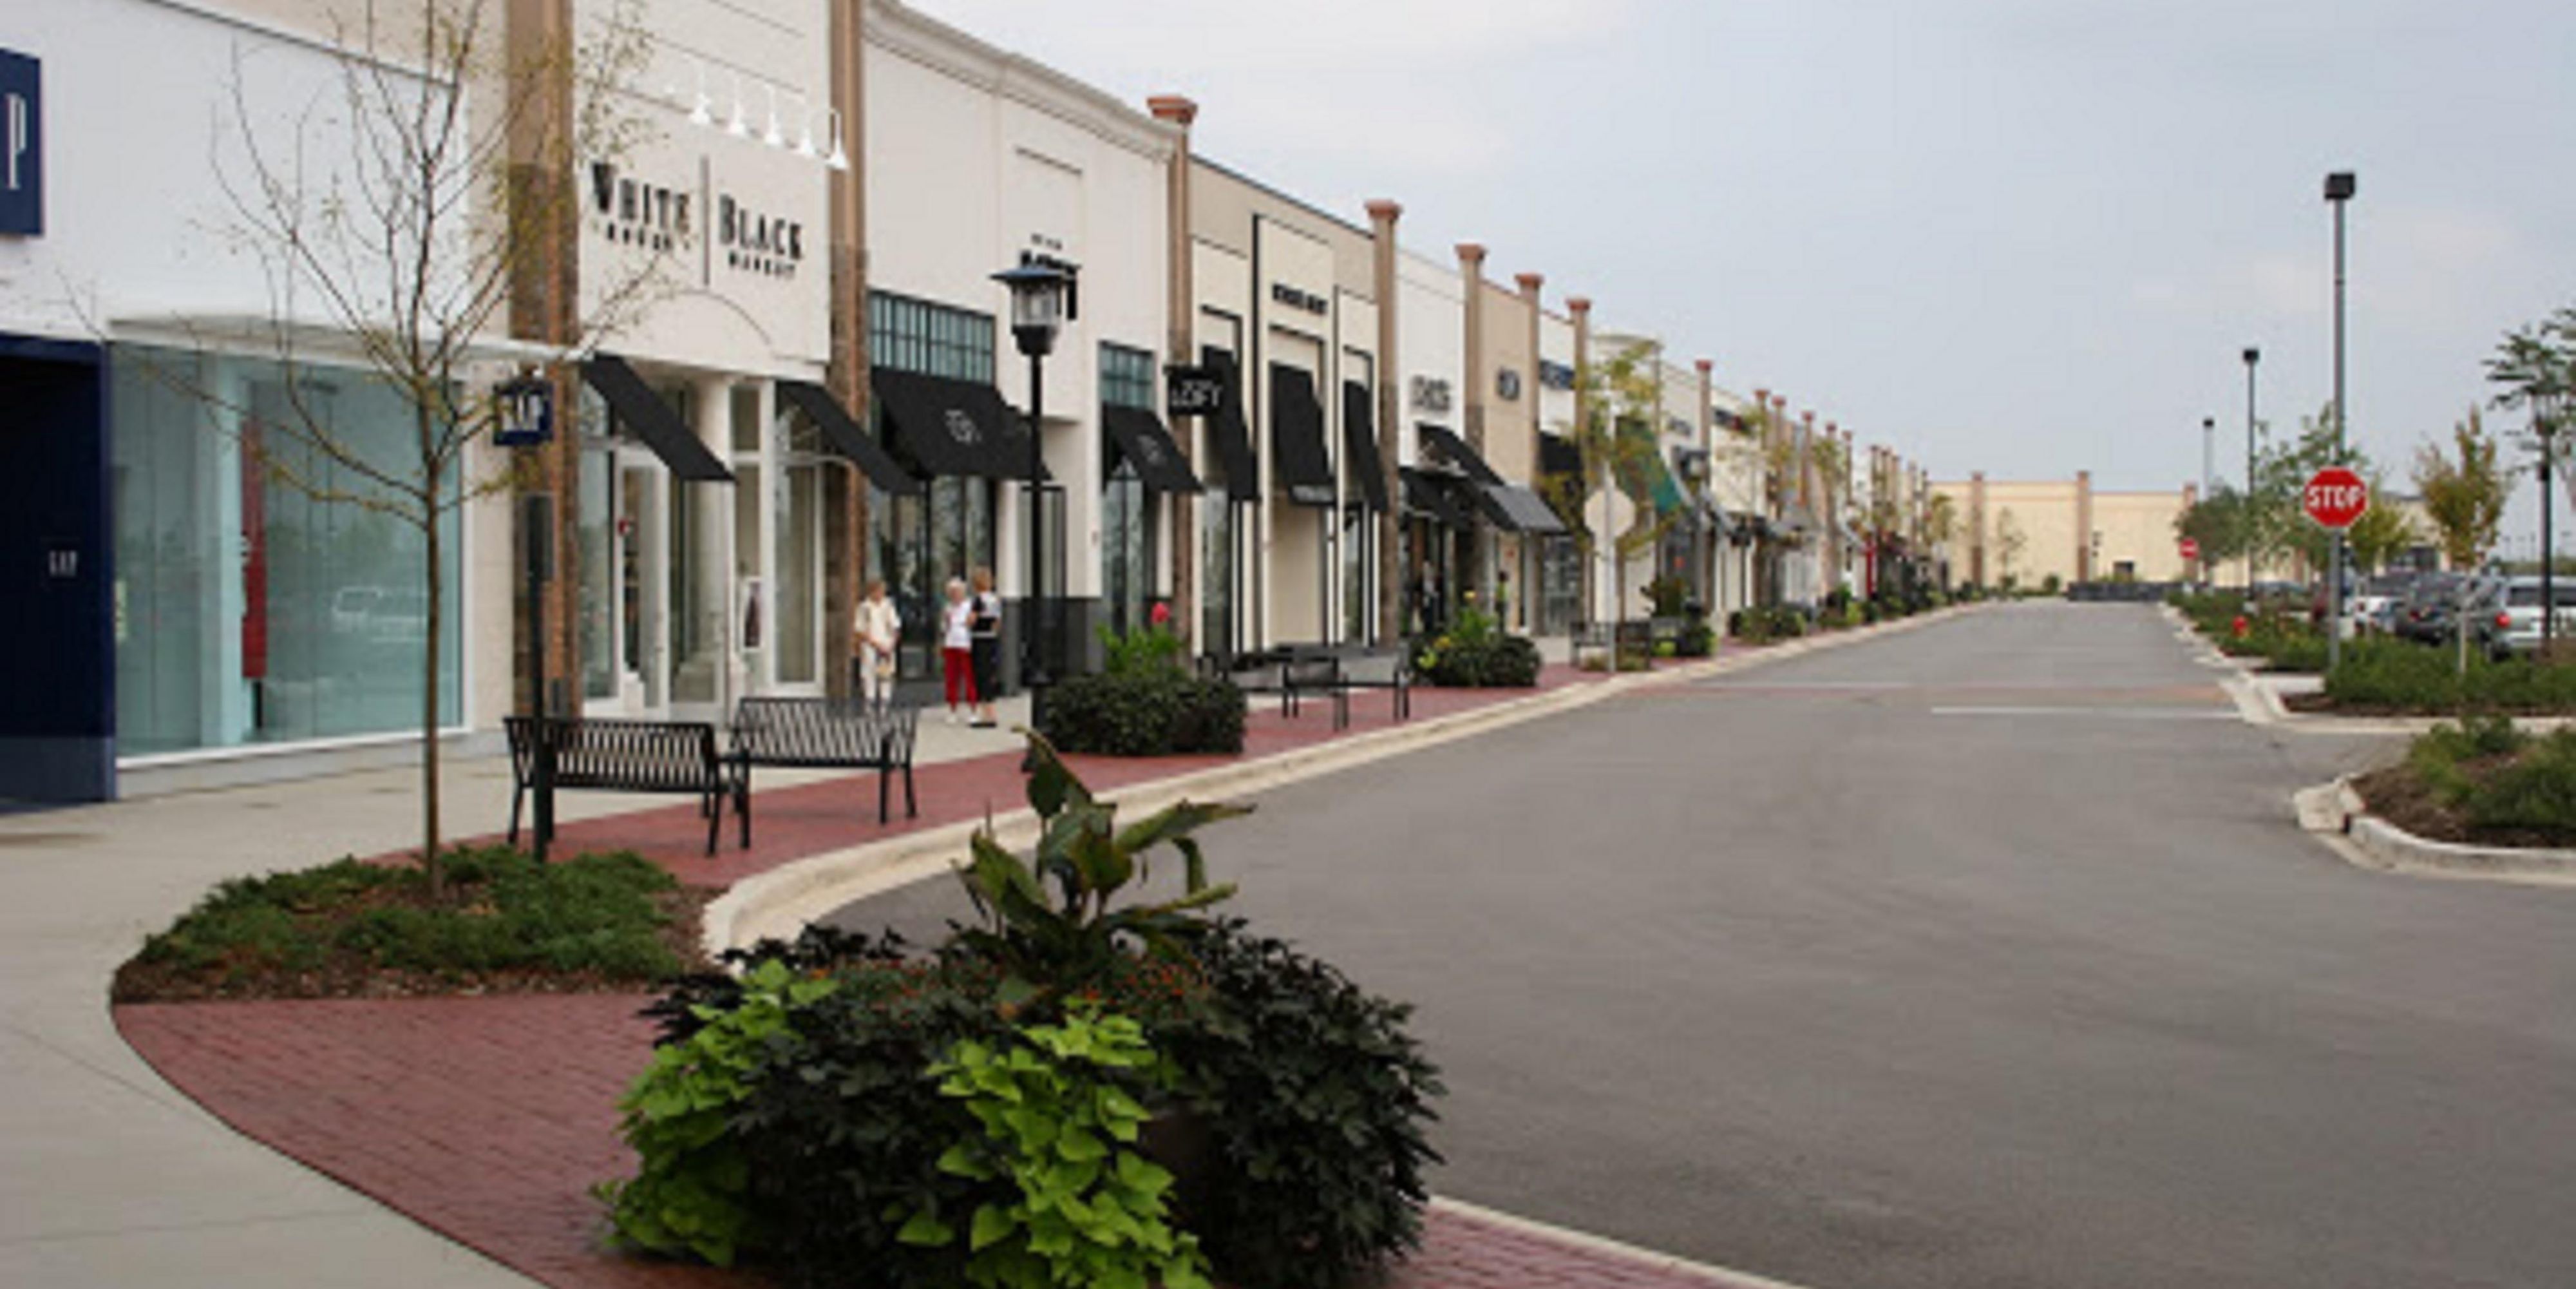 Algonquin Commons is an outdoor shopping mall, or lifestyle center, located along Randall Road in Algonquin, Illinois, a northwest suburb of Chicago. The center includes over 50 retailers and restaurants and 600,000 total square feet.  